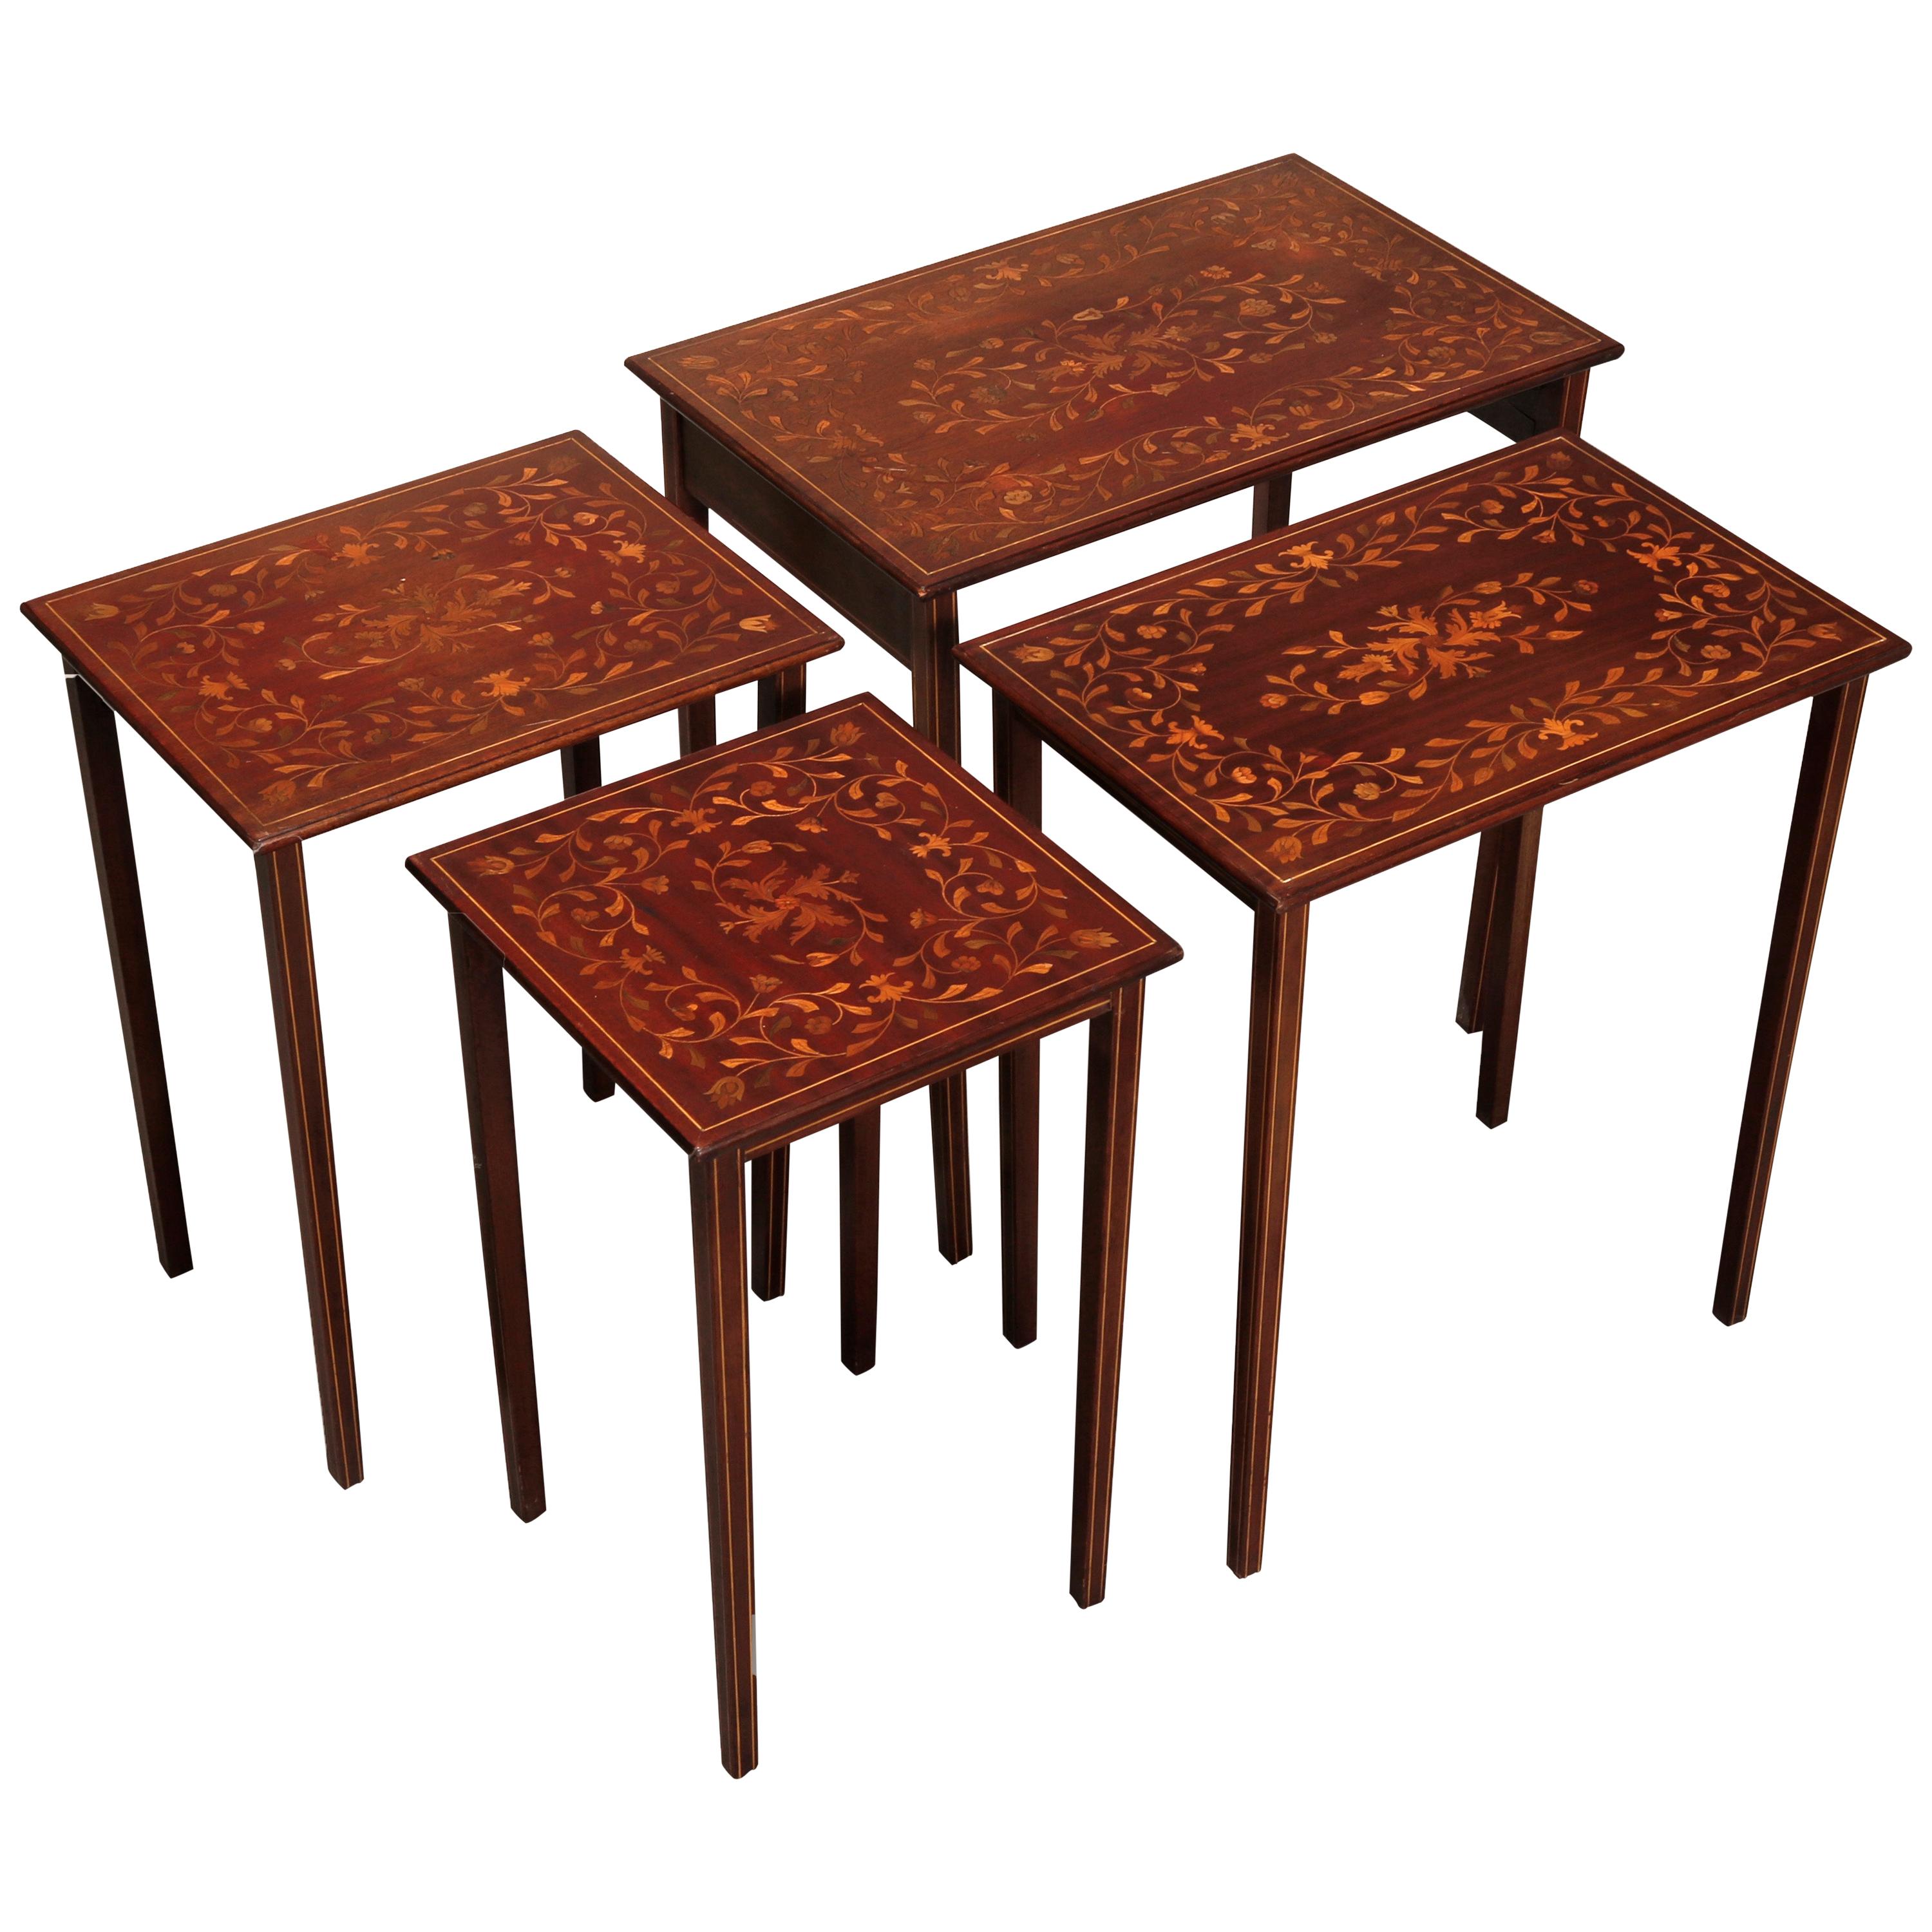 Antique R.J. Horner Mahogany Marquetry Satinwood Inlay Nesting Tables circa 1910